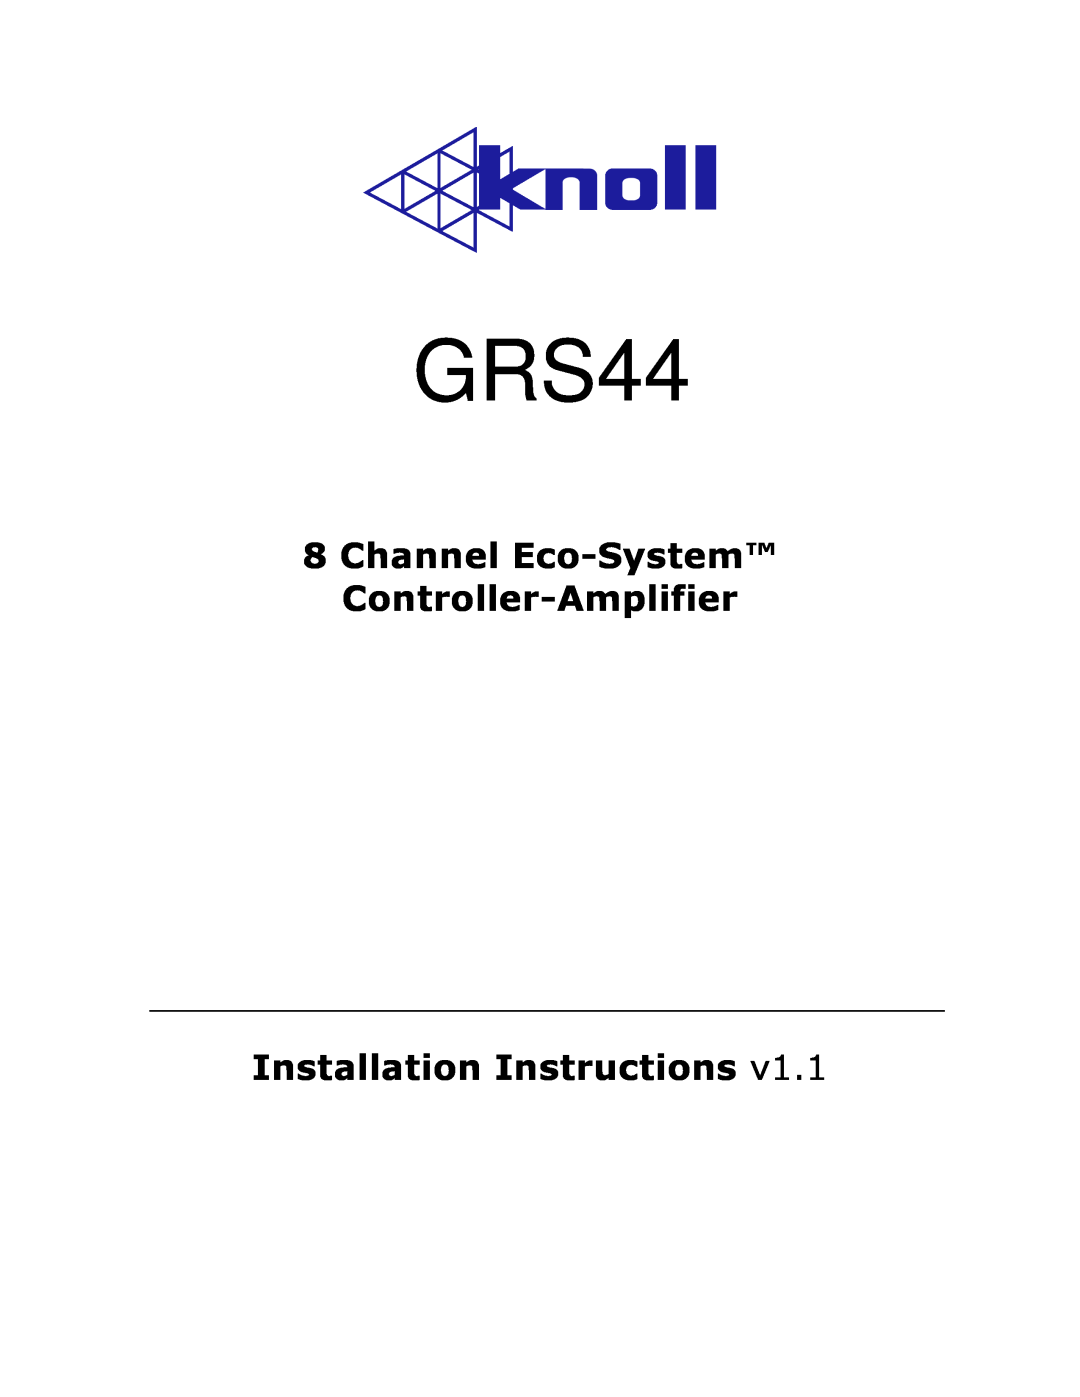 Knoll GRS44 installation instructions 8Channel Eco-System Controller-Amplifier, Installation Instructions 